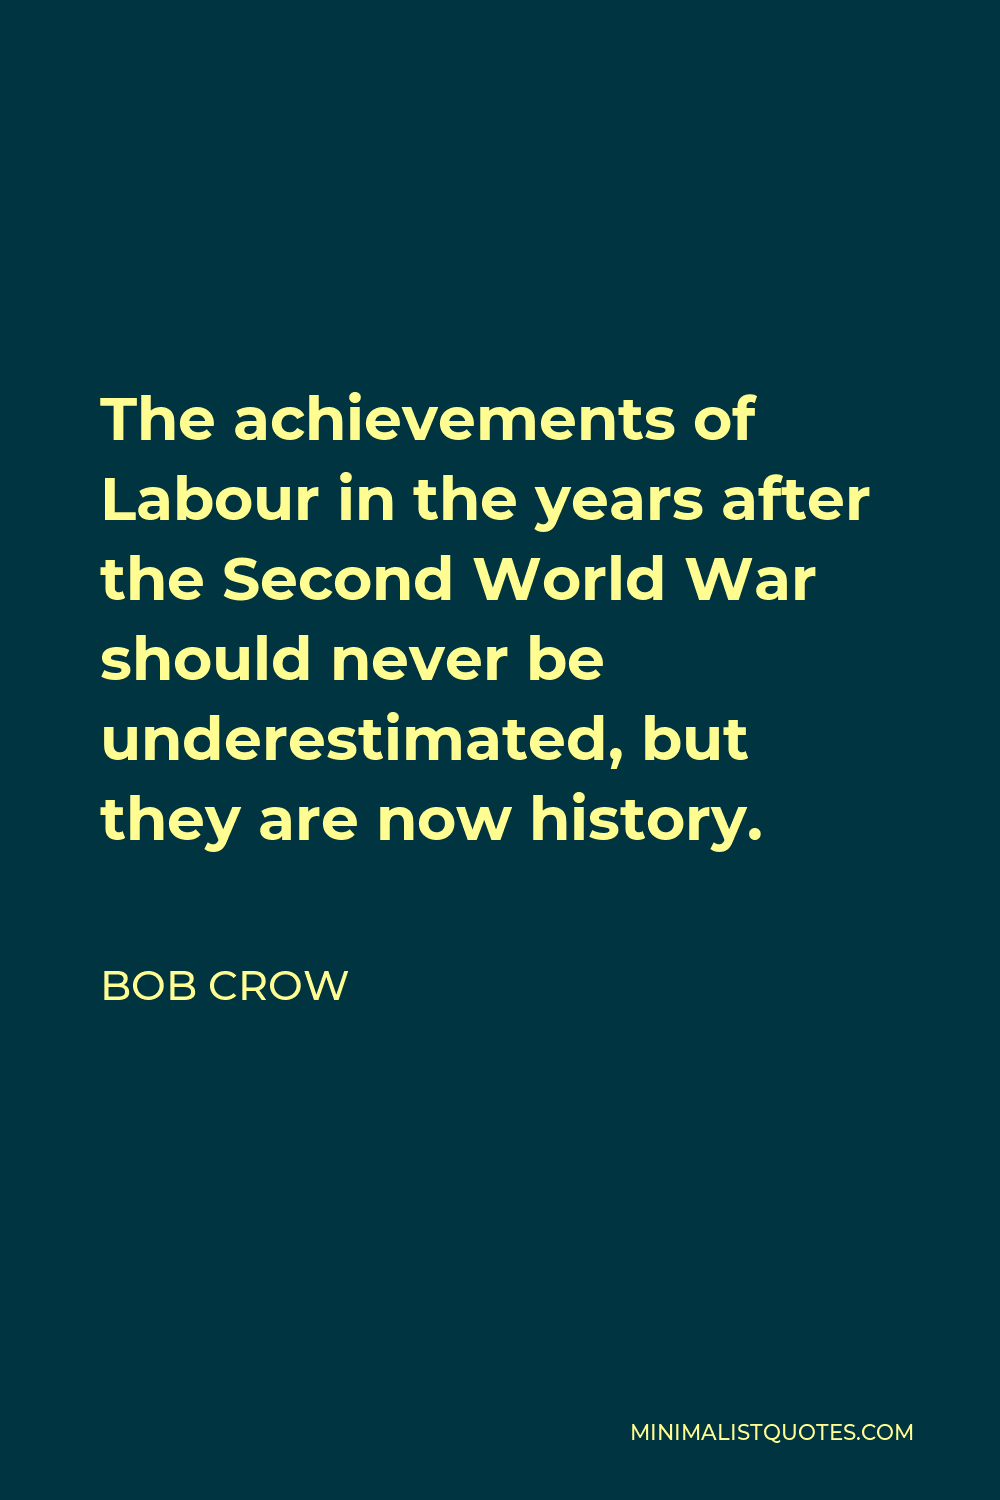 Bob Crow Quote - The achievements of Labour in the years after the Second World War should never be underestimated, but they are now history.